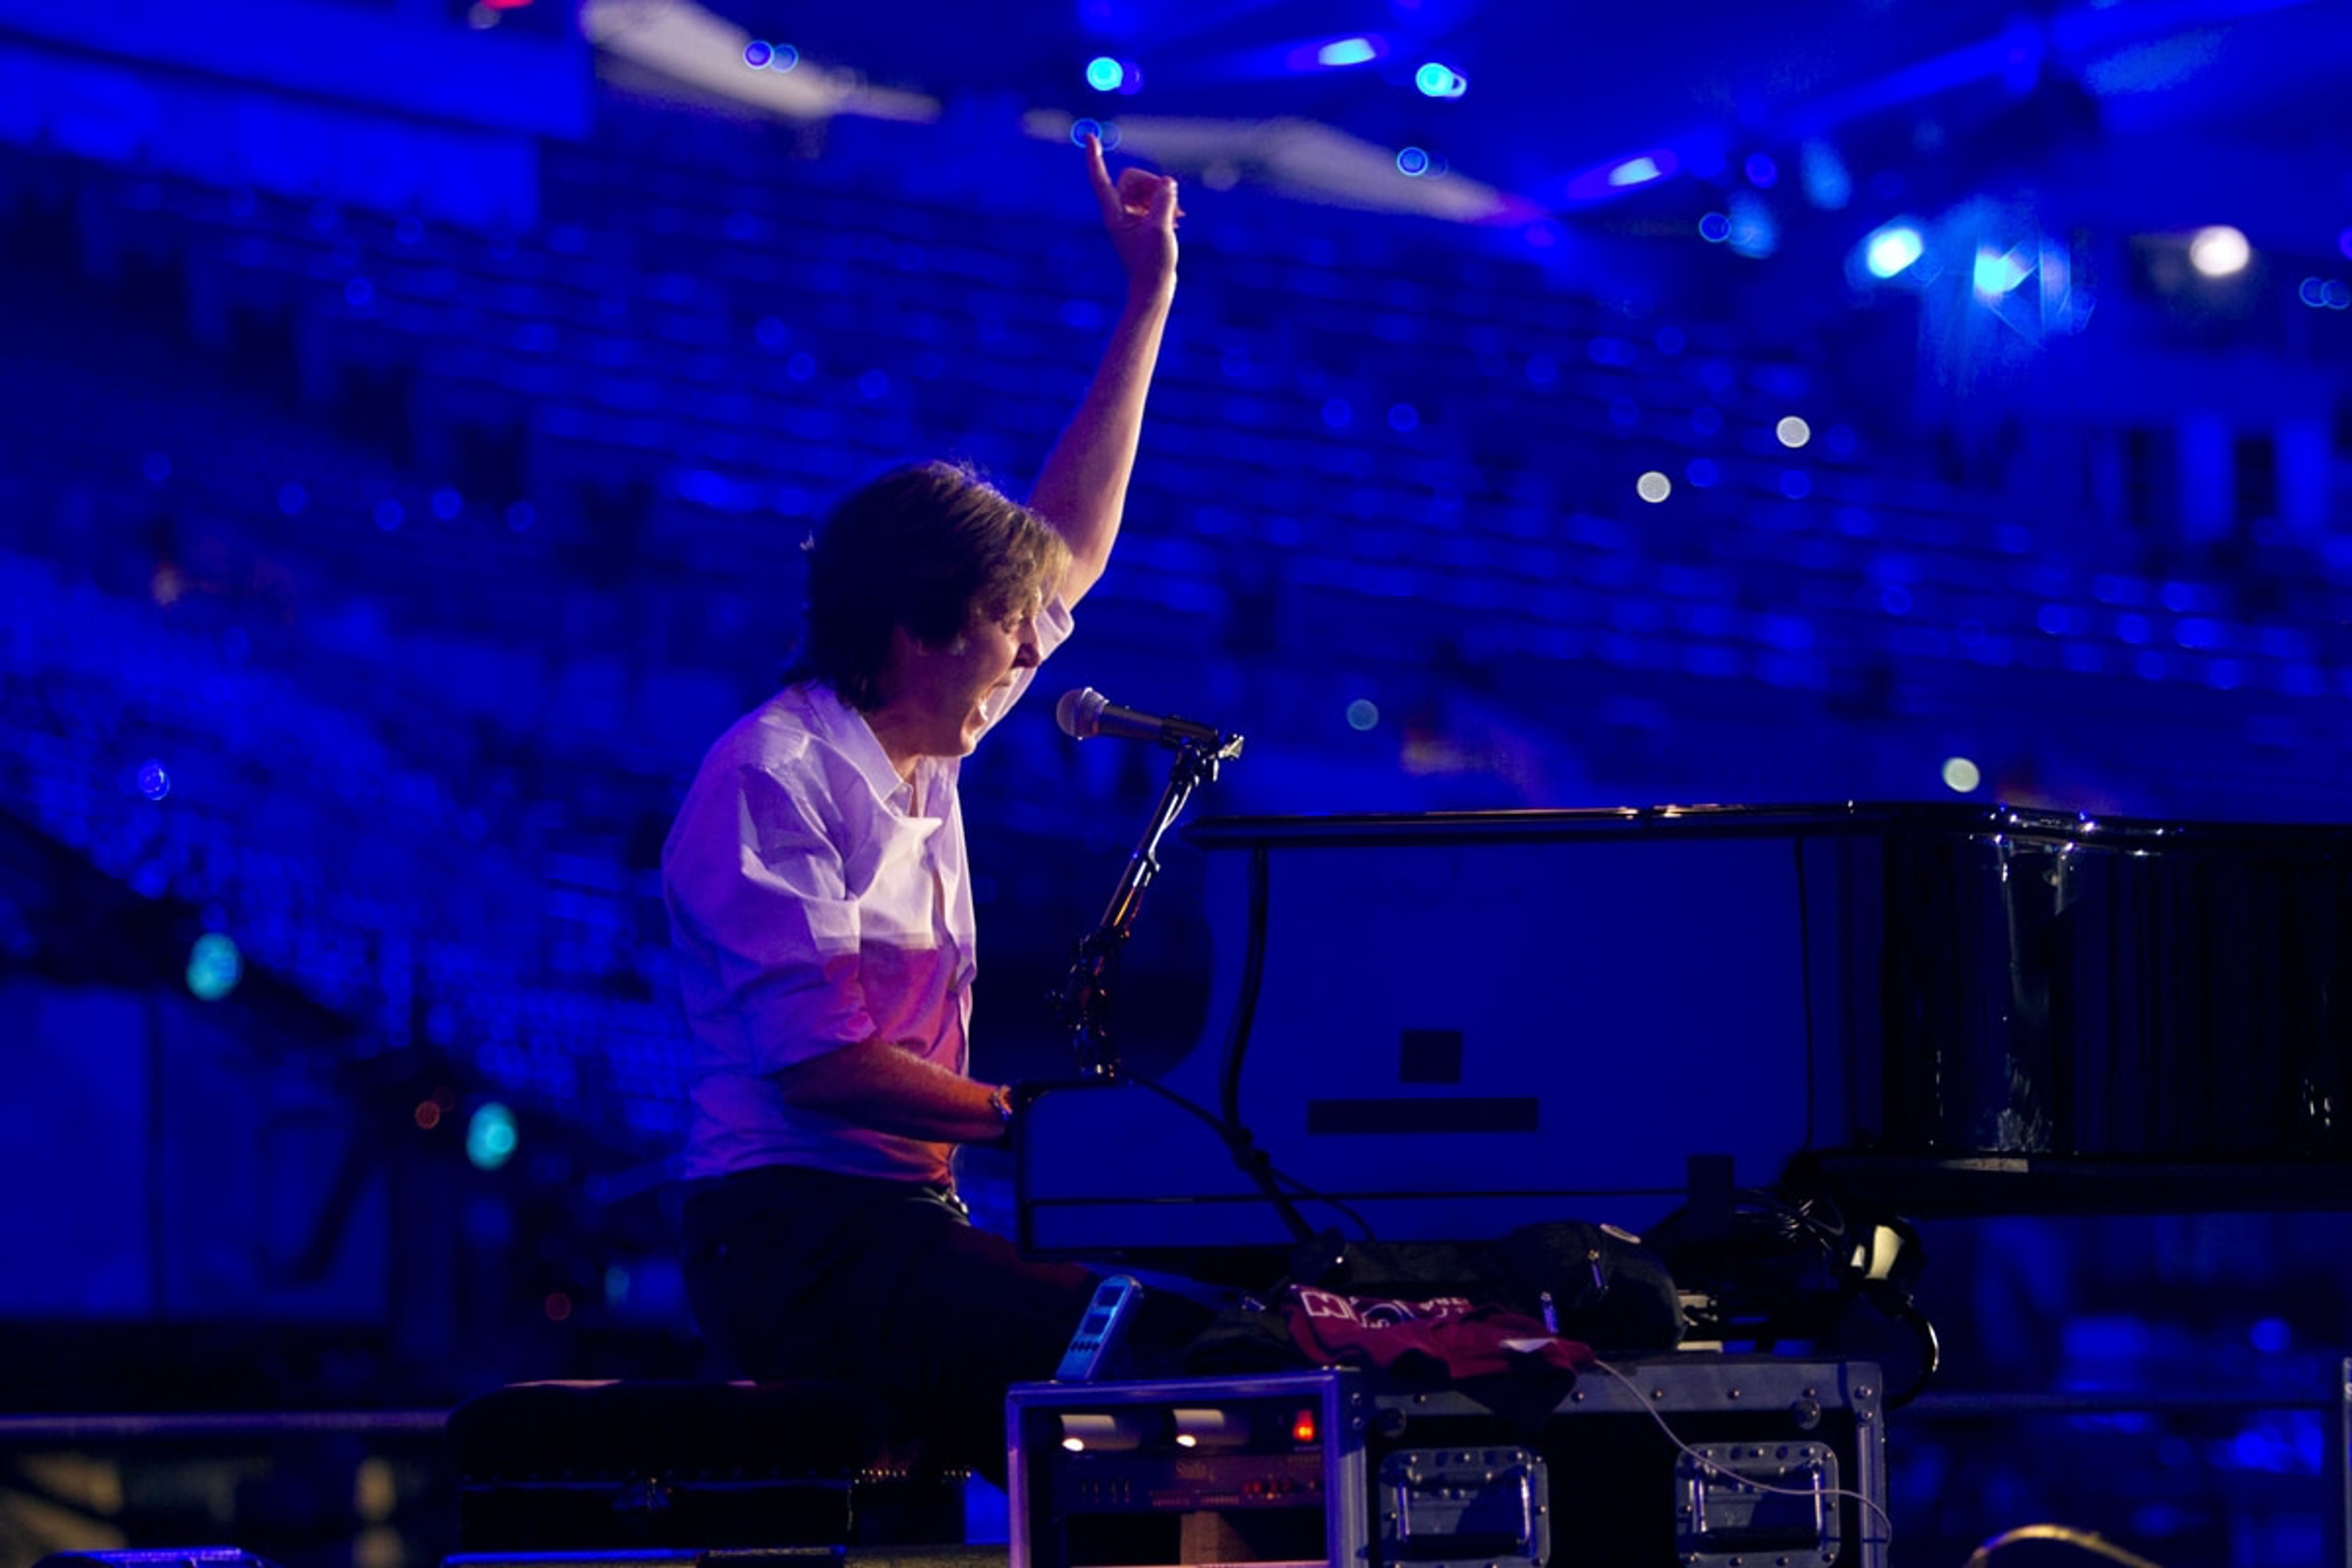 Paul on stage at the Olympic Opening Ceremony rehearsals, London, 27-Jul-12